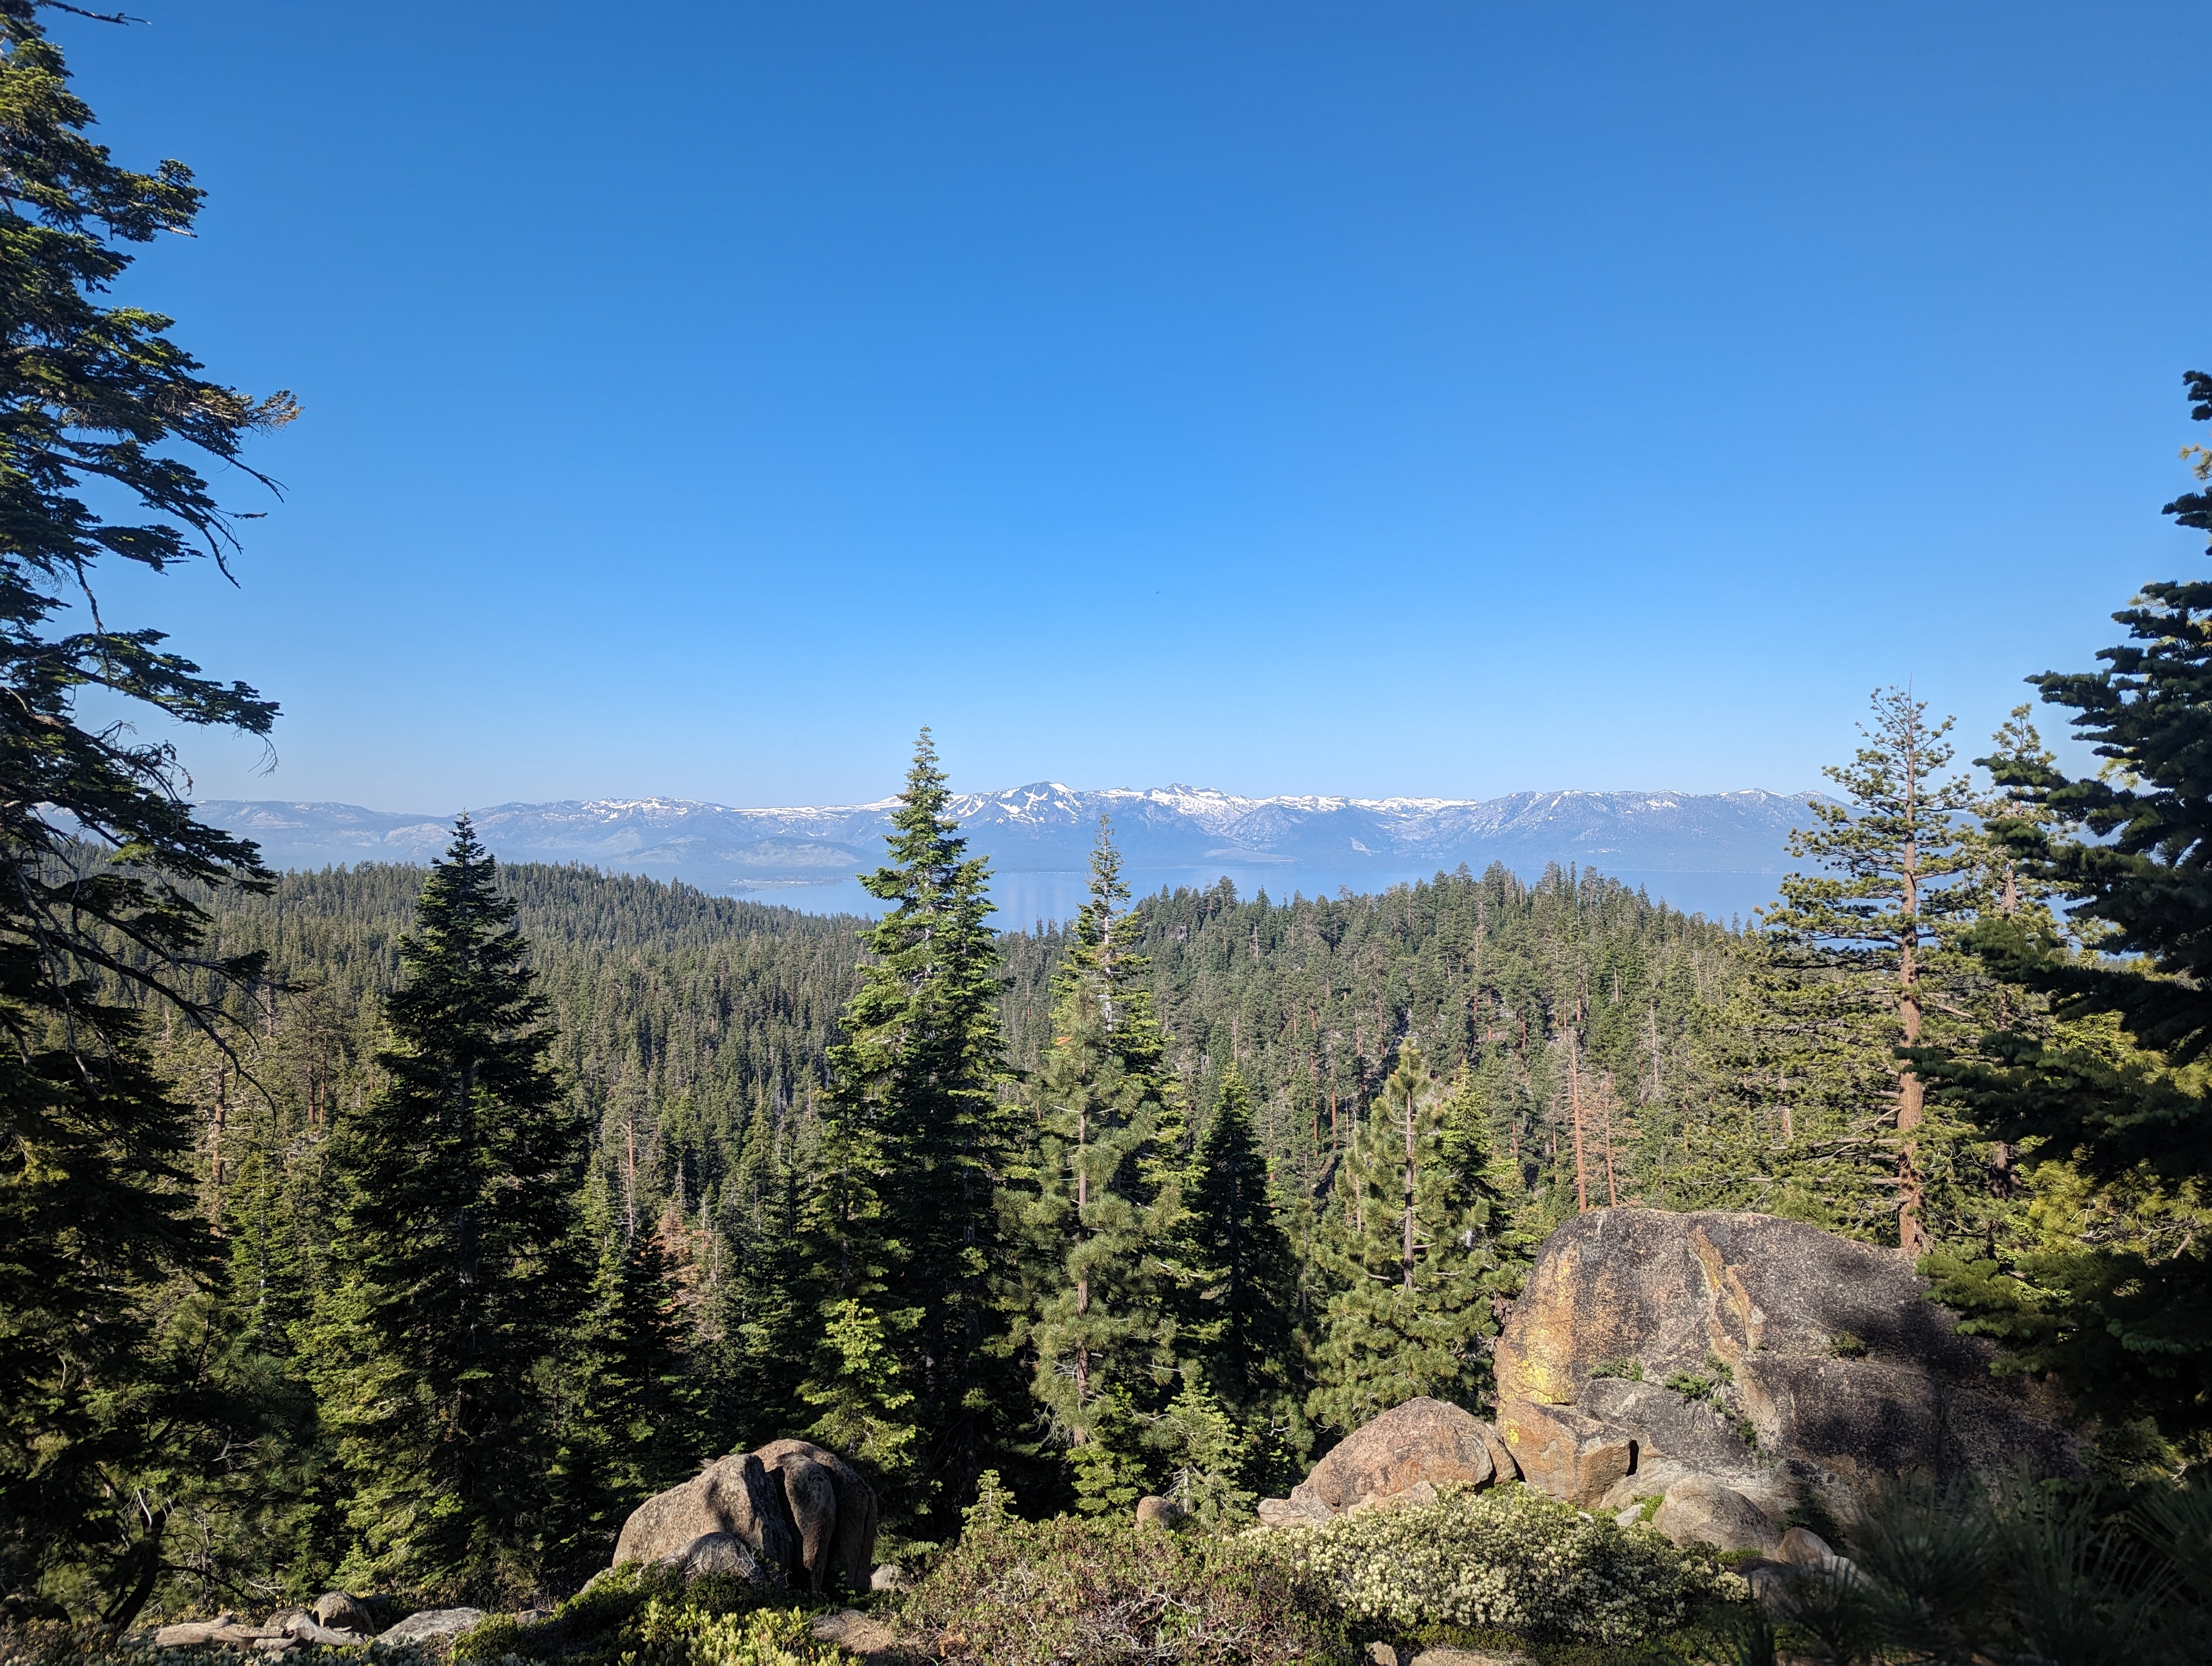 Lake Tahoe and Mt Tallac in the distance